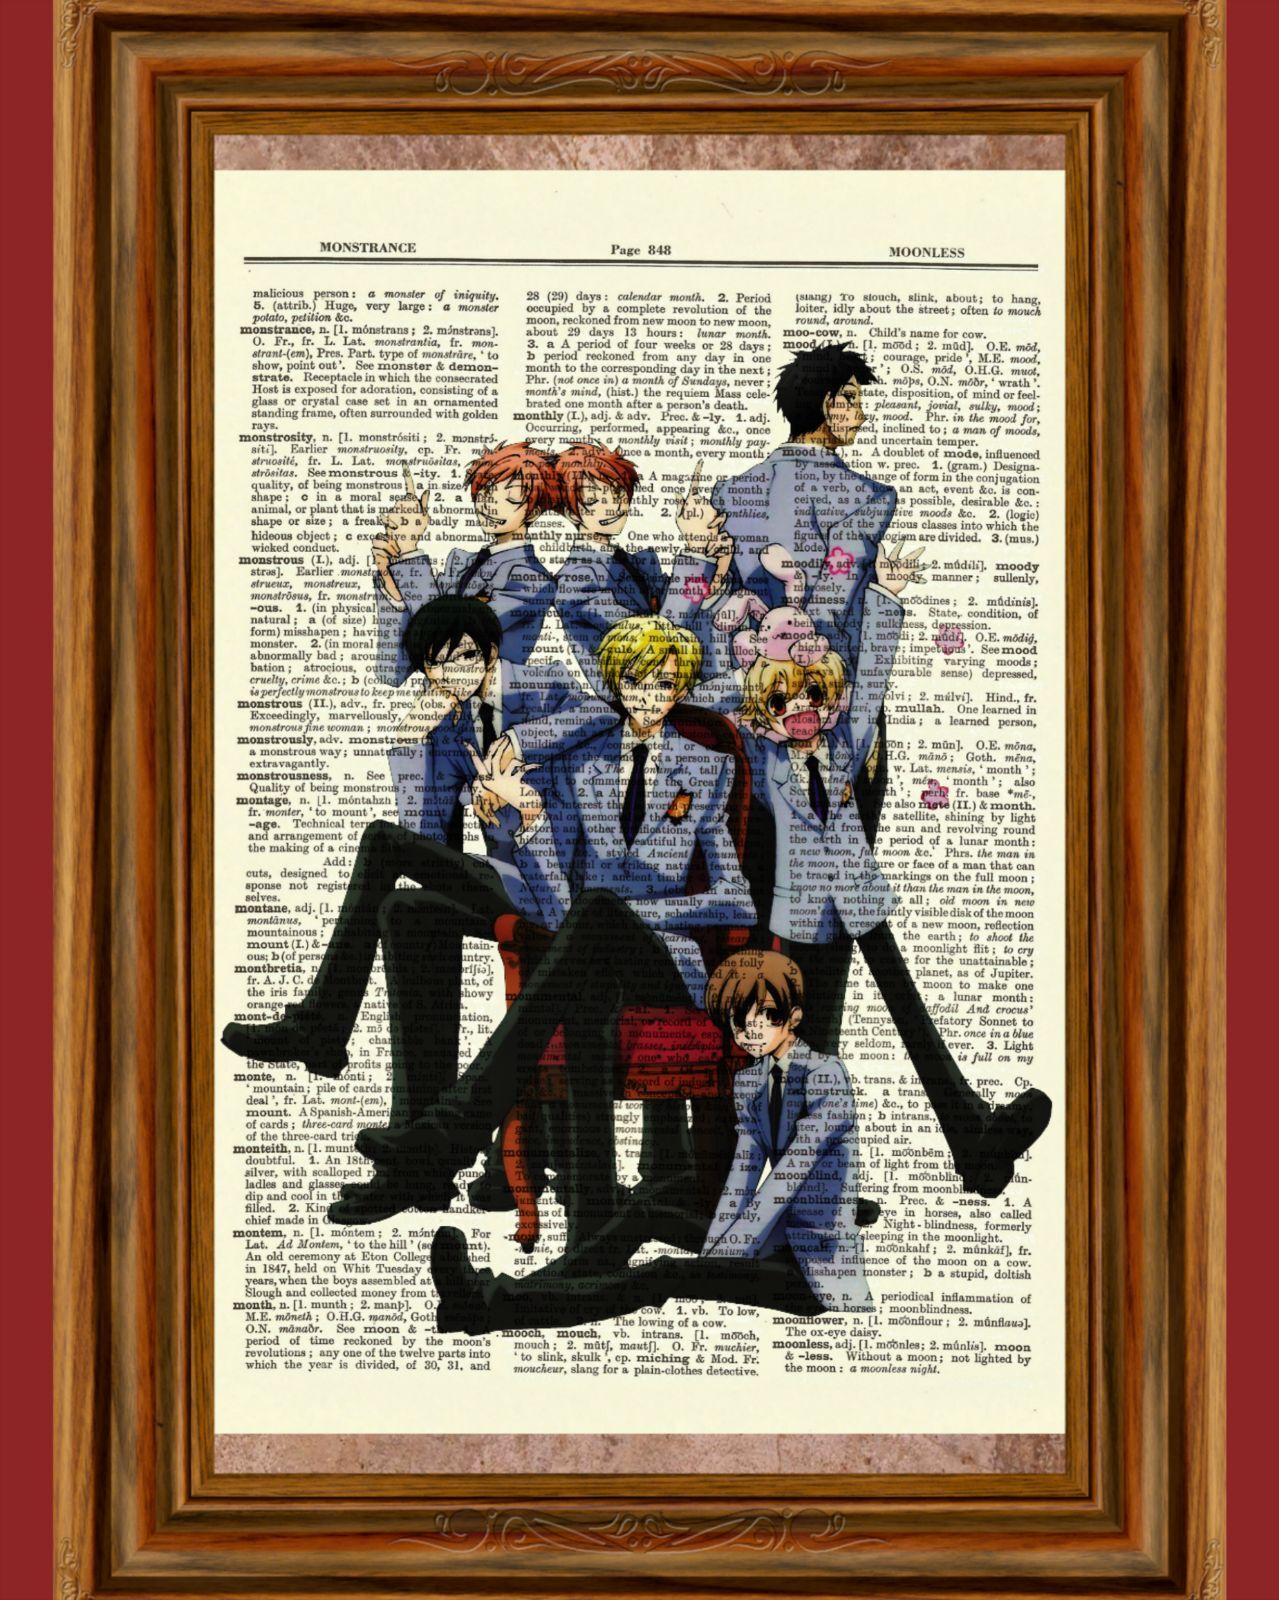 Ouran High School Host Club Dictionary Art Print Poster Picture Anime Manga 